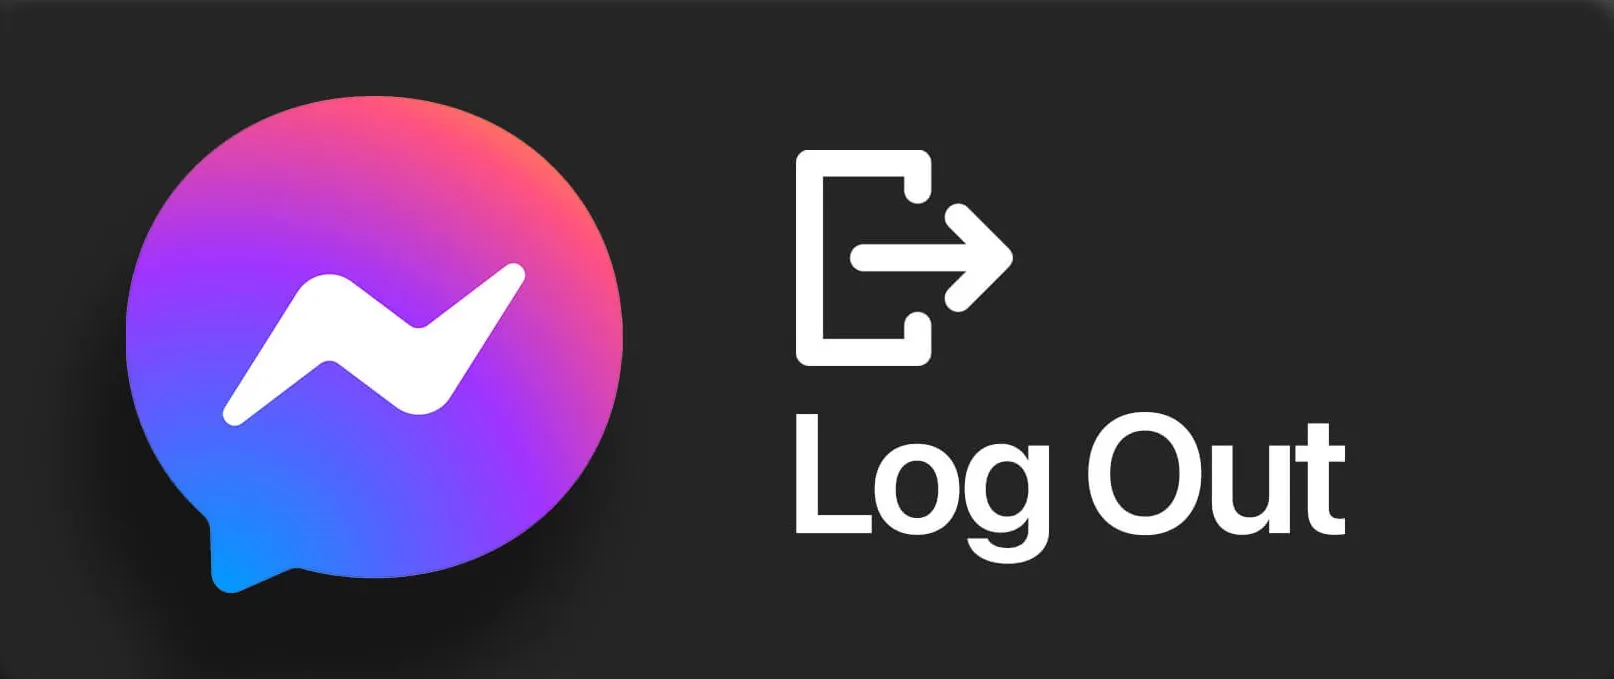 How To Logout Of Messenger?